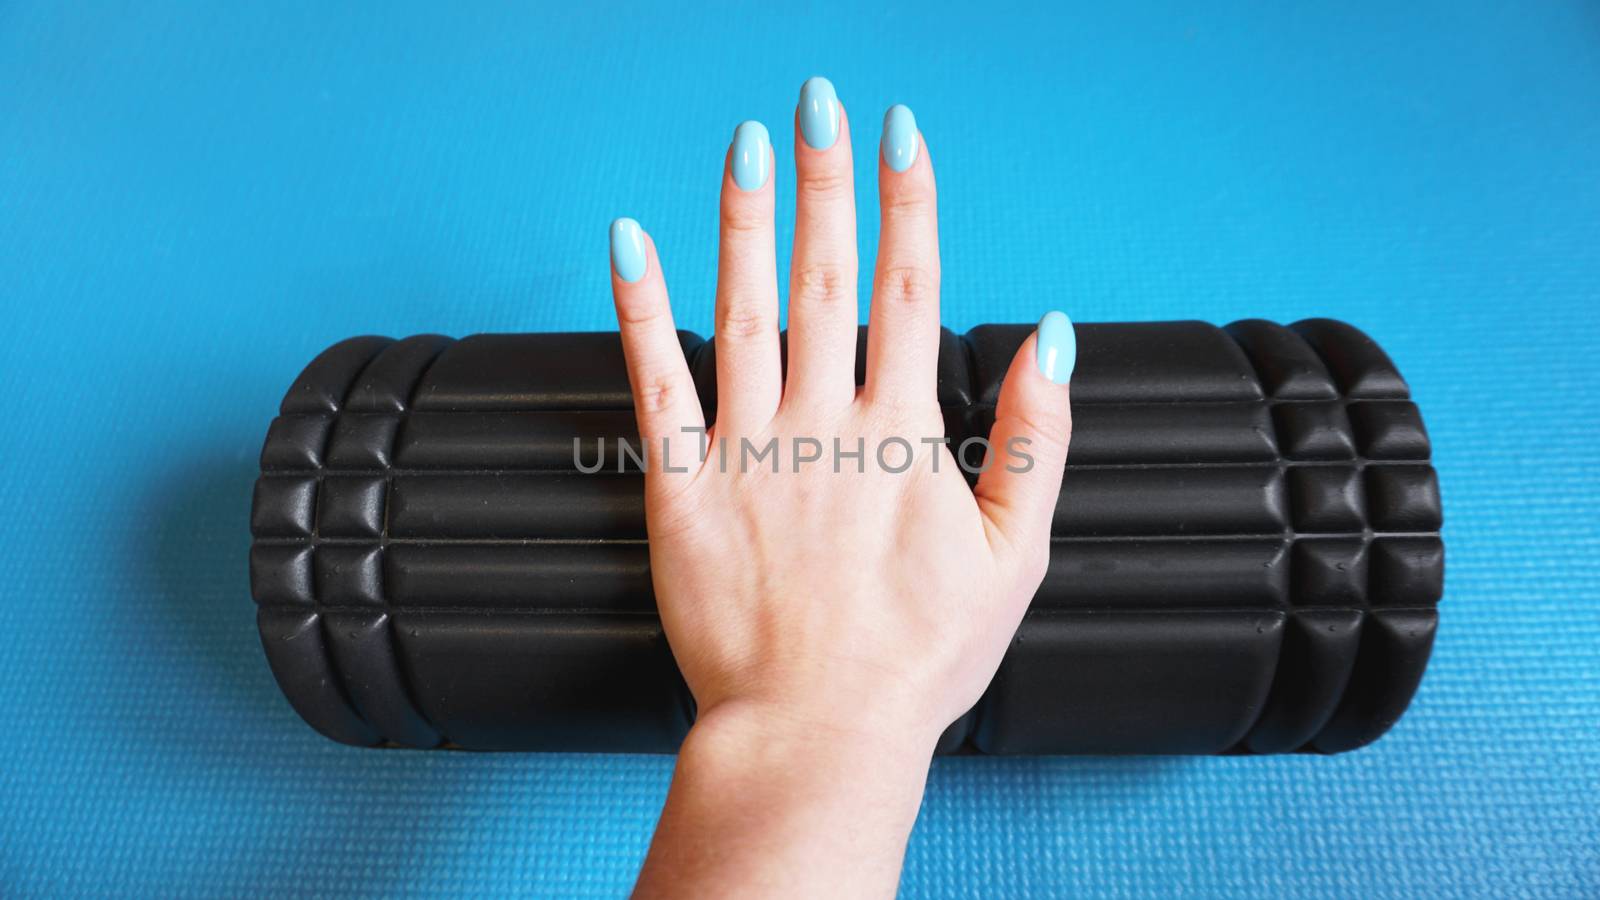 Foam Roller Gym Fitness Equipment Blue background self Myofascial Release - MFR. Hand holds a roller. How to choose equipment for sports